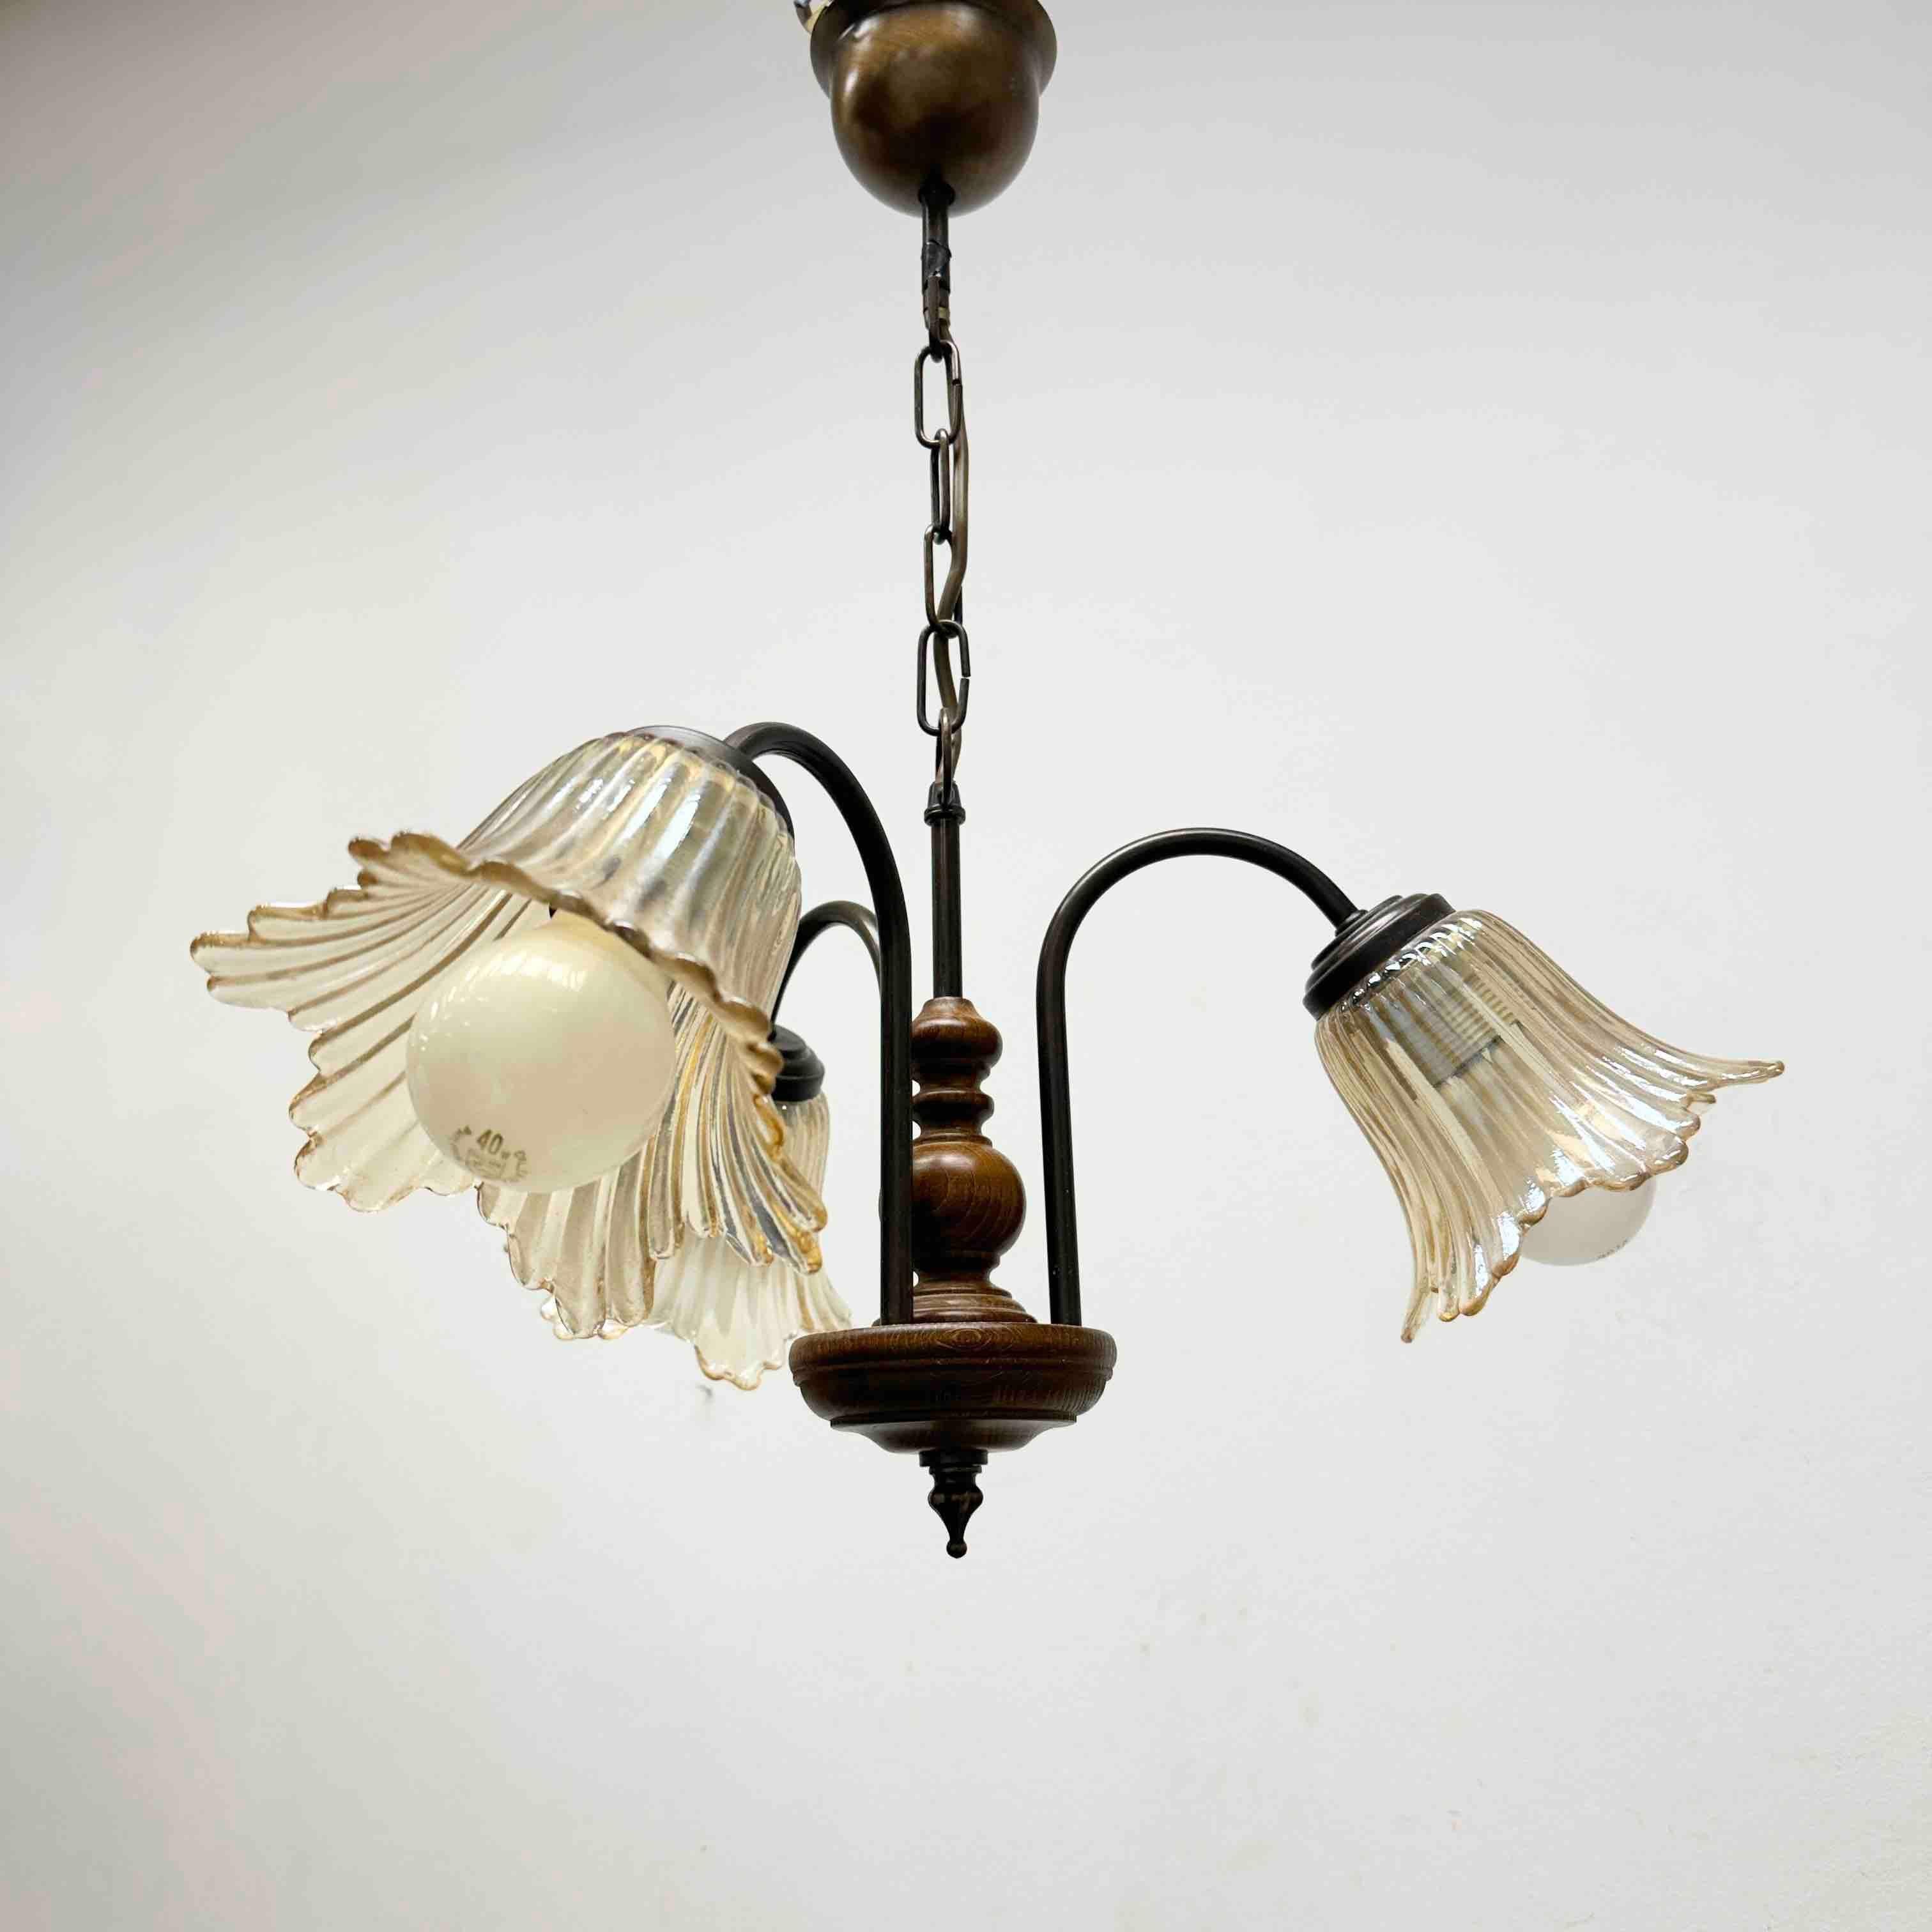 Gorgeous German Tole Wood Metal Glas Shade Three Light Chandelier, 1970s For Sale 6